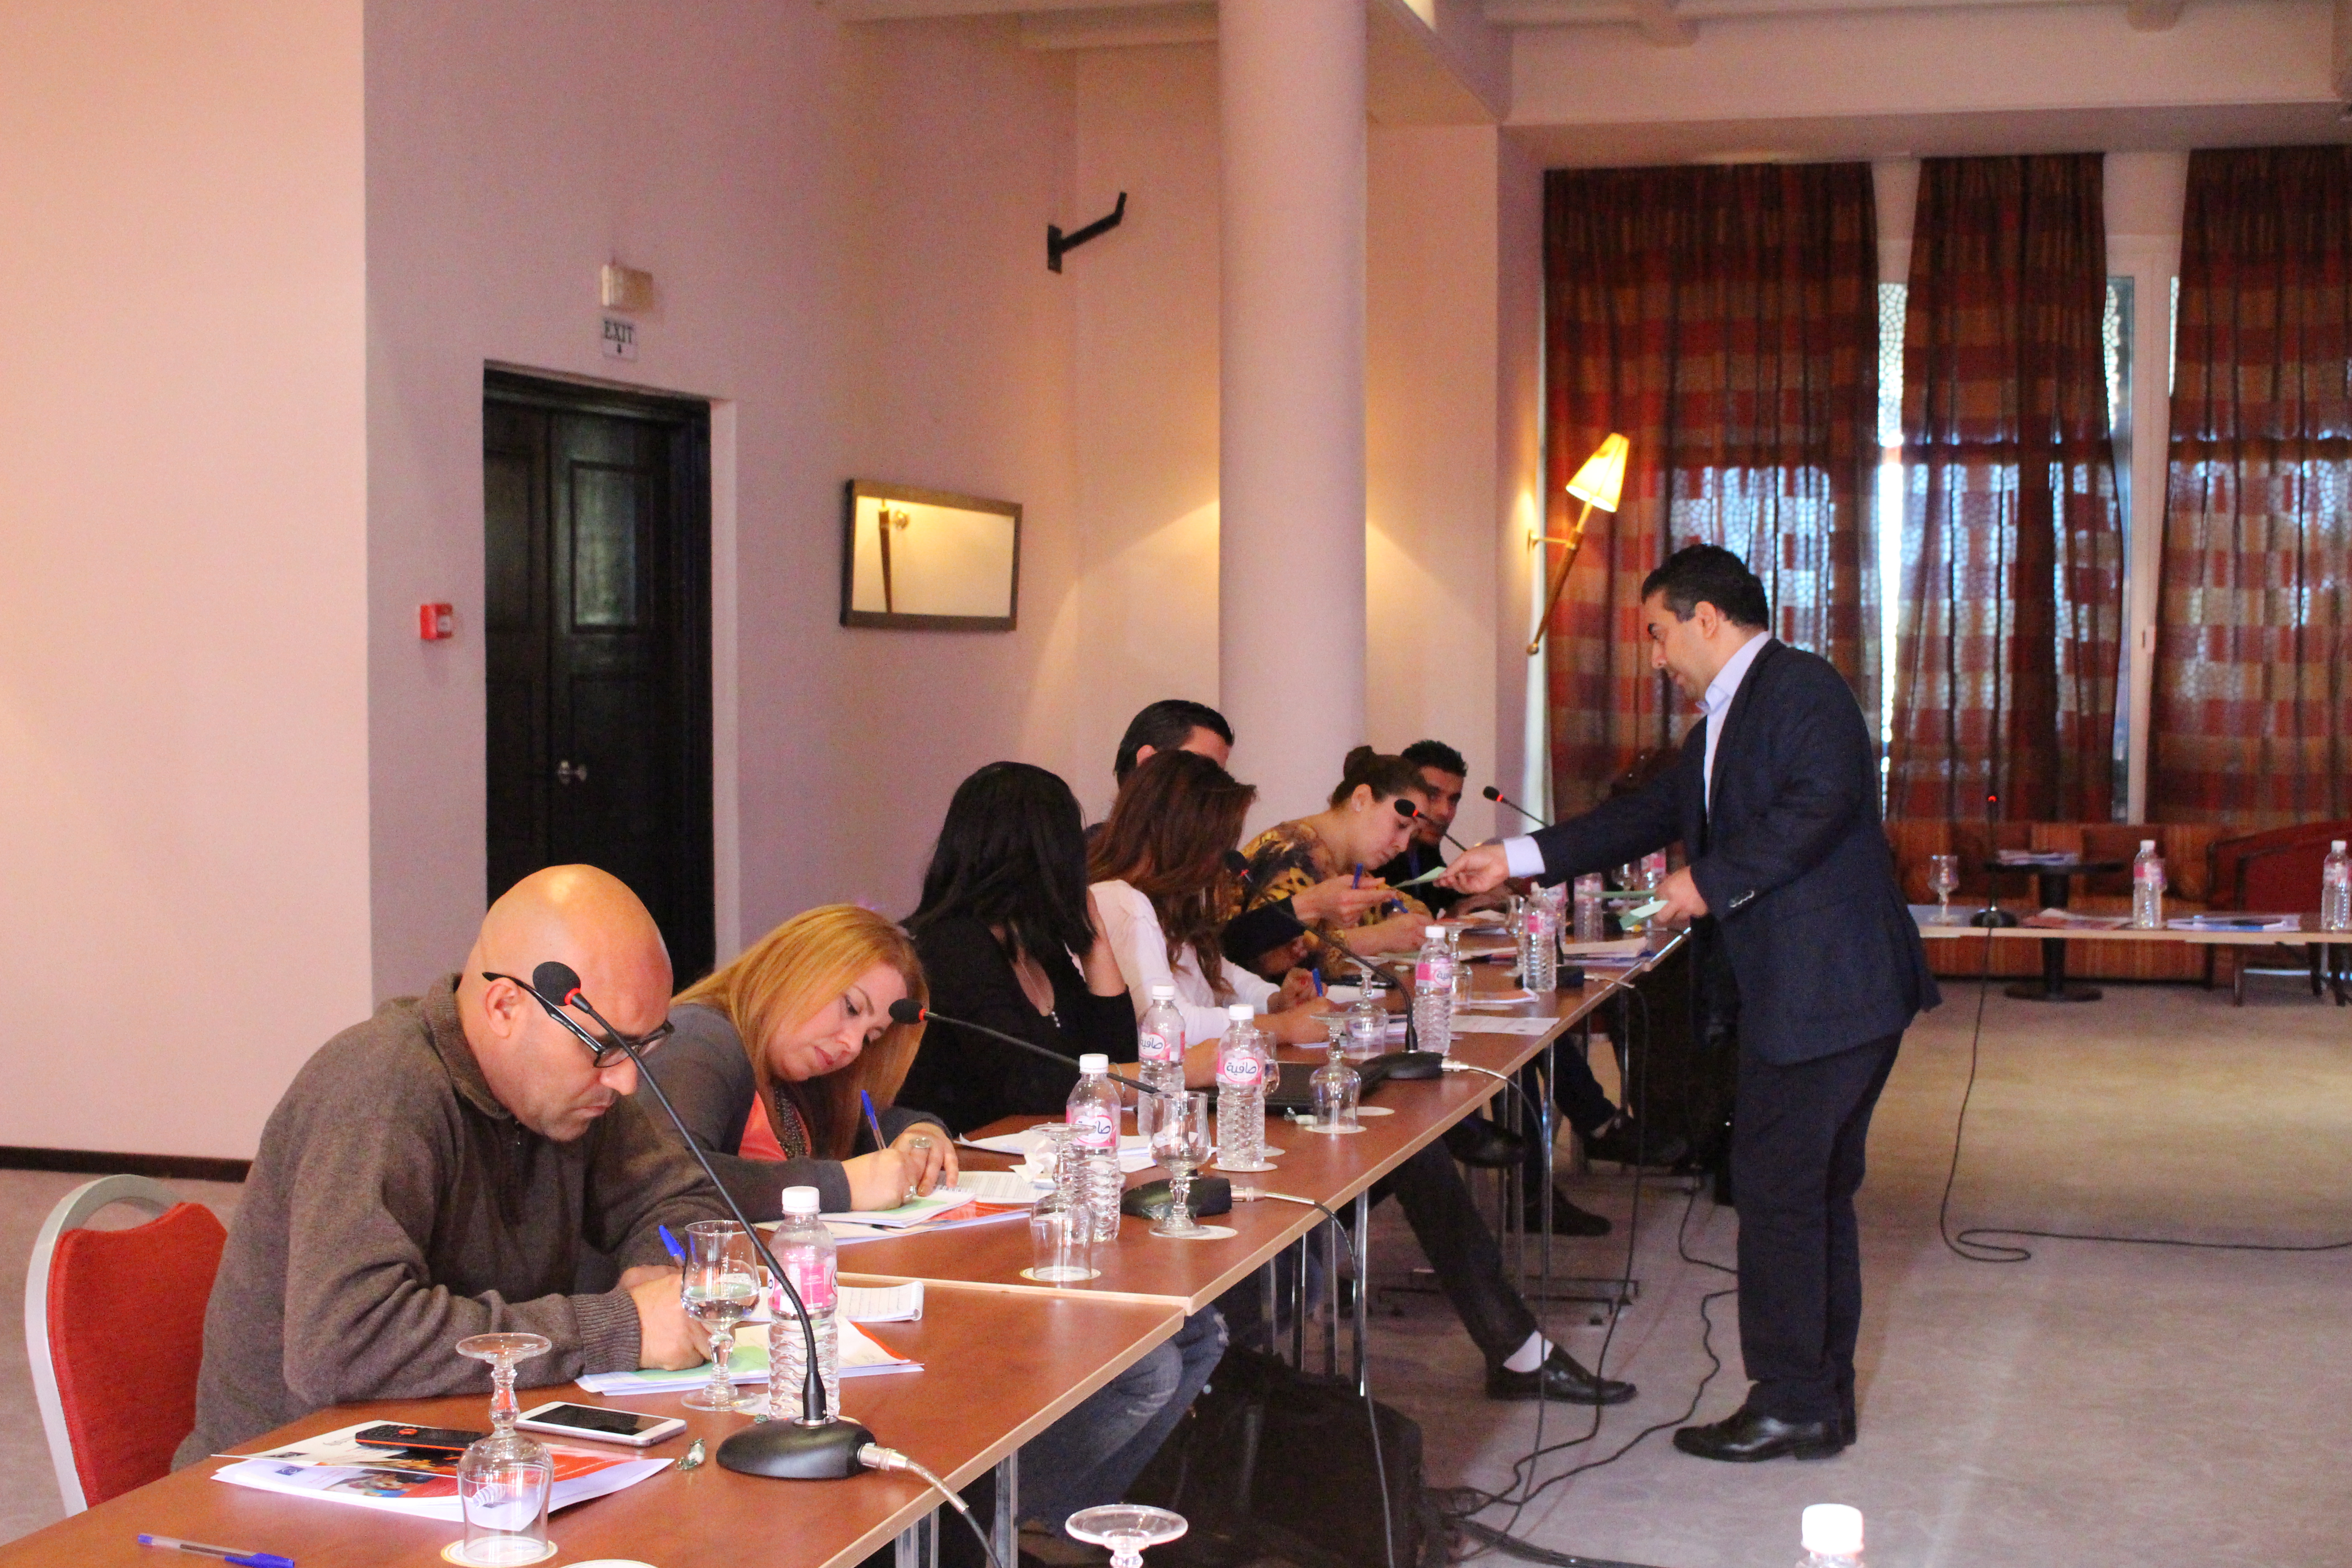 training session for journalists on media coverage of terrorism held in Tunisia 